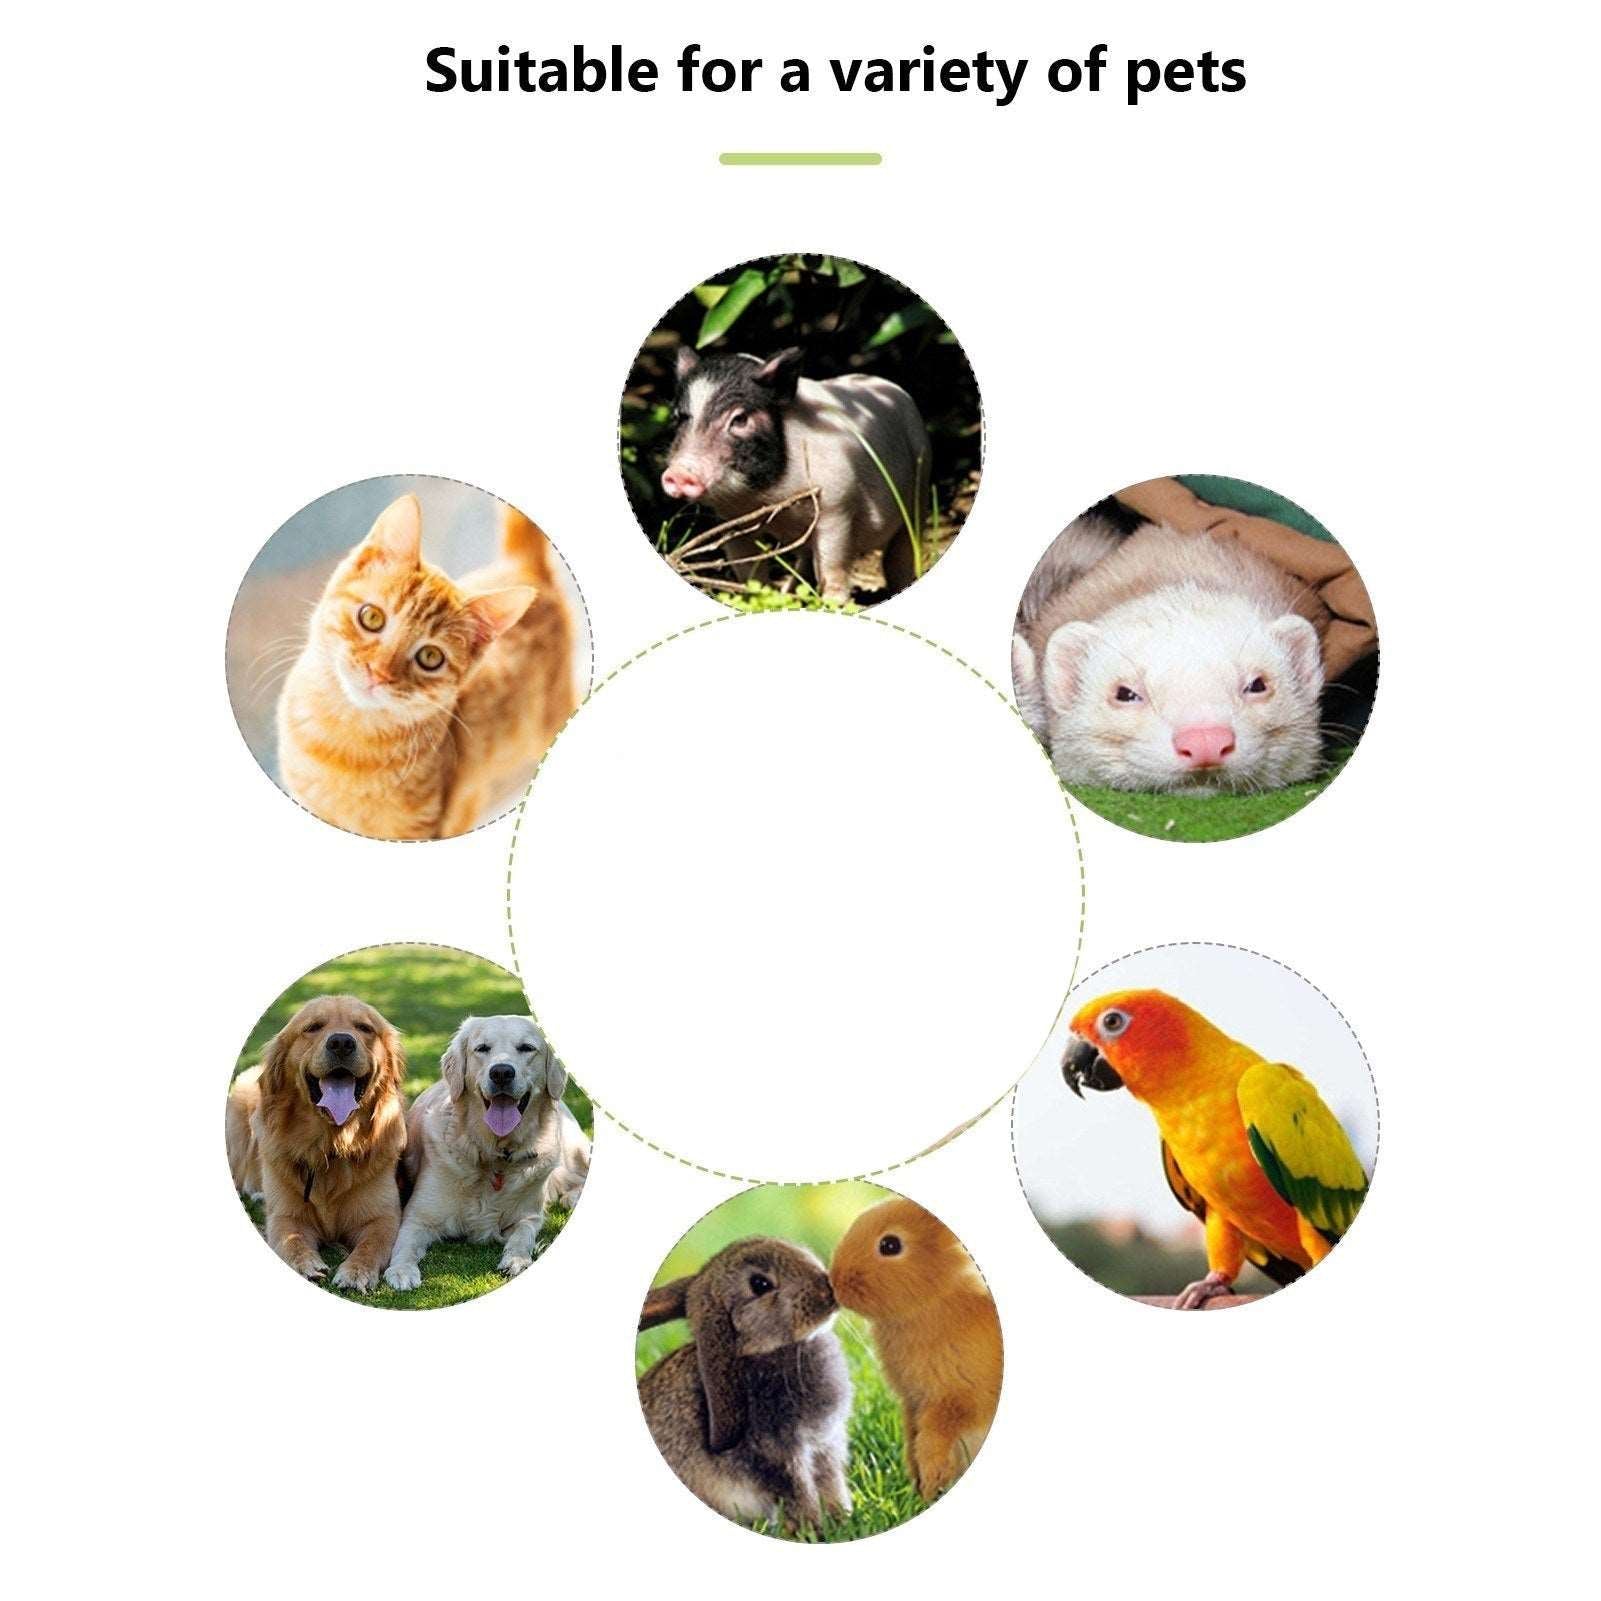 Suitable for a variety of pets